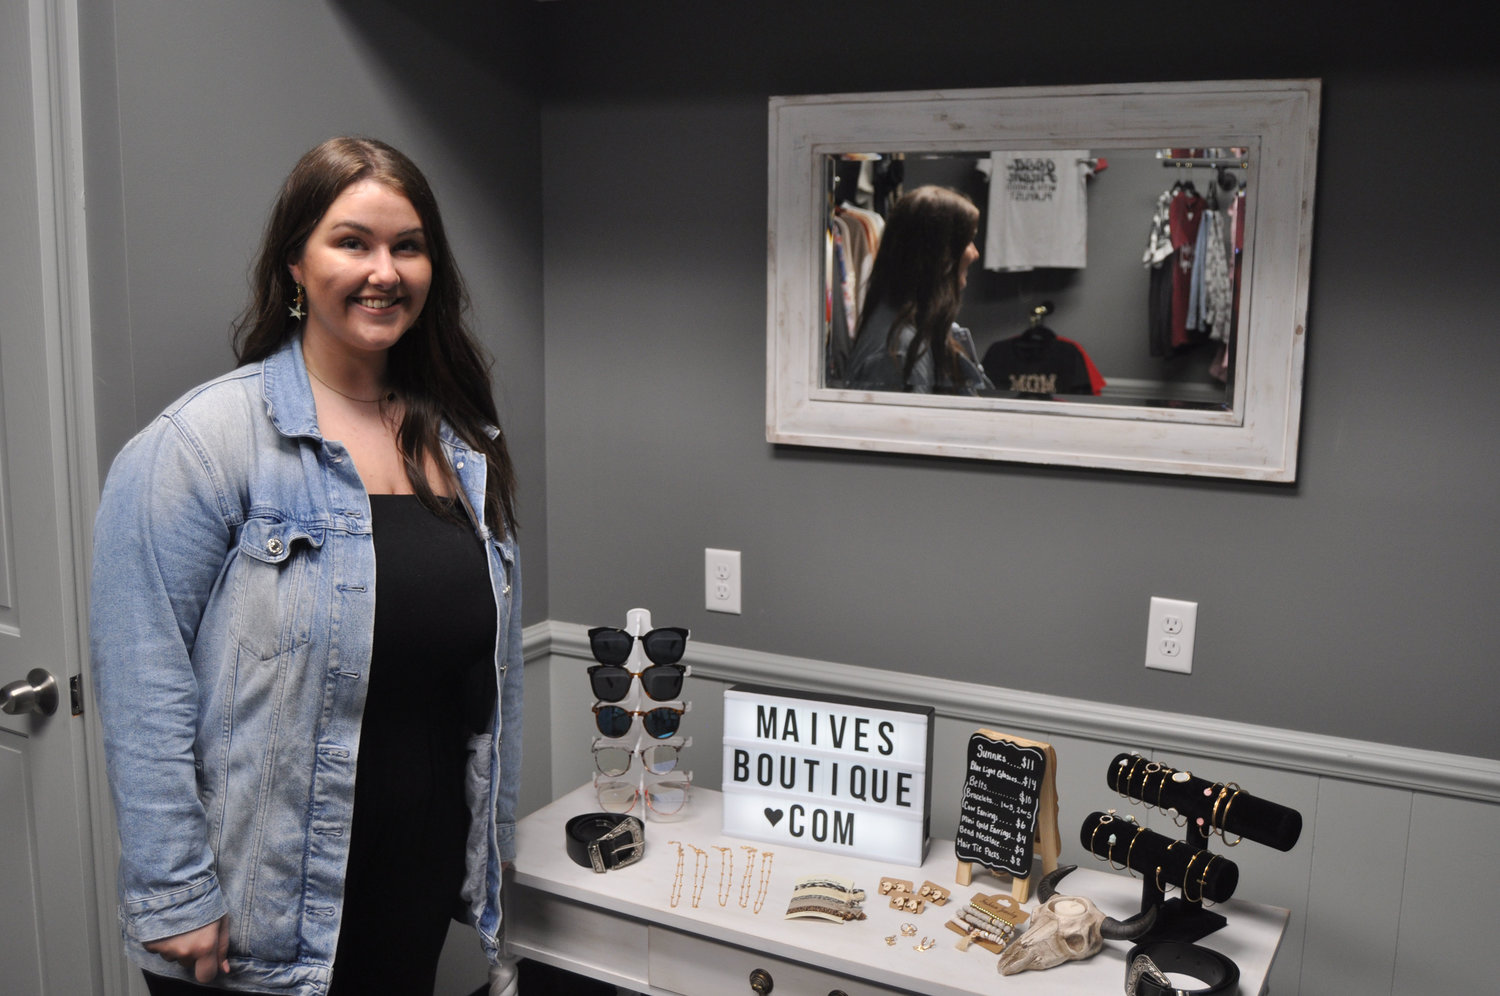 Lilly Wallace stands in her business Maive’s Boutique in the Weemickle Building in downtown Crawfordsville. Wallace shares the building with Demi Haas’s beauty establishment djh esthetics and brows.